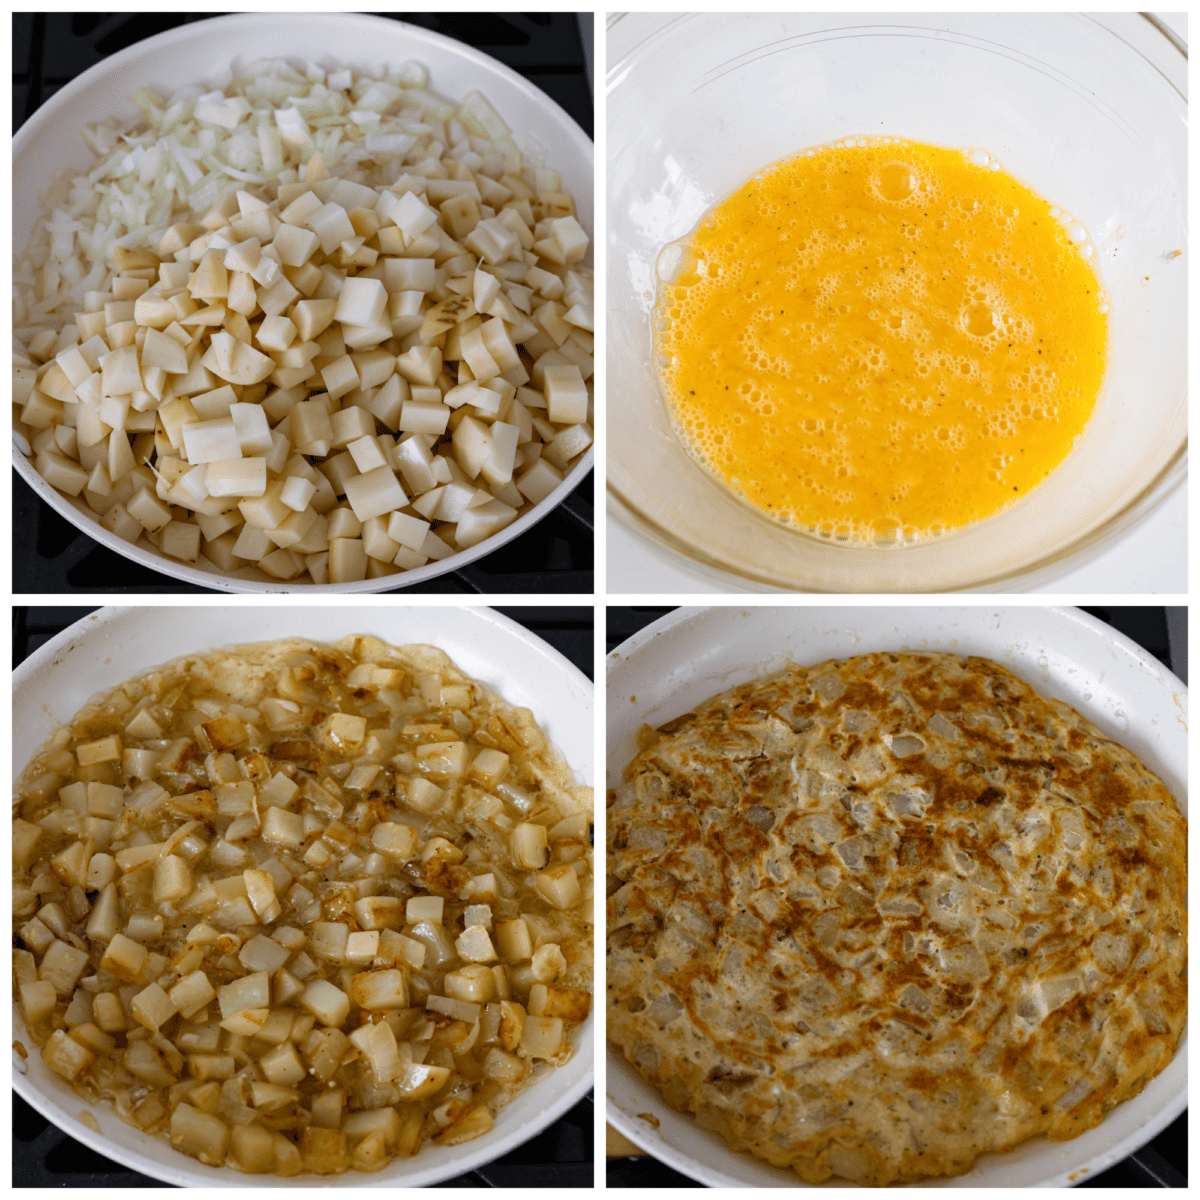 First photo of onions and potatoes cooking in a skillet. Second photo of the eggs whisked together in a bowl. Third photo of the eggs added to the skillet of onions and potatoes. Fourth photo of the tortilla flipped over in the skillet.